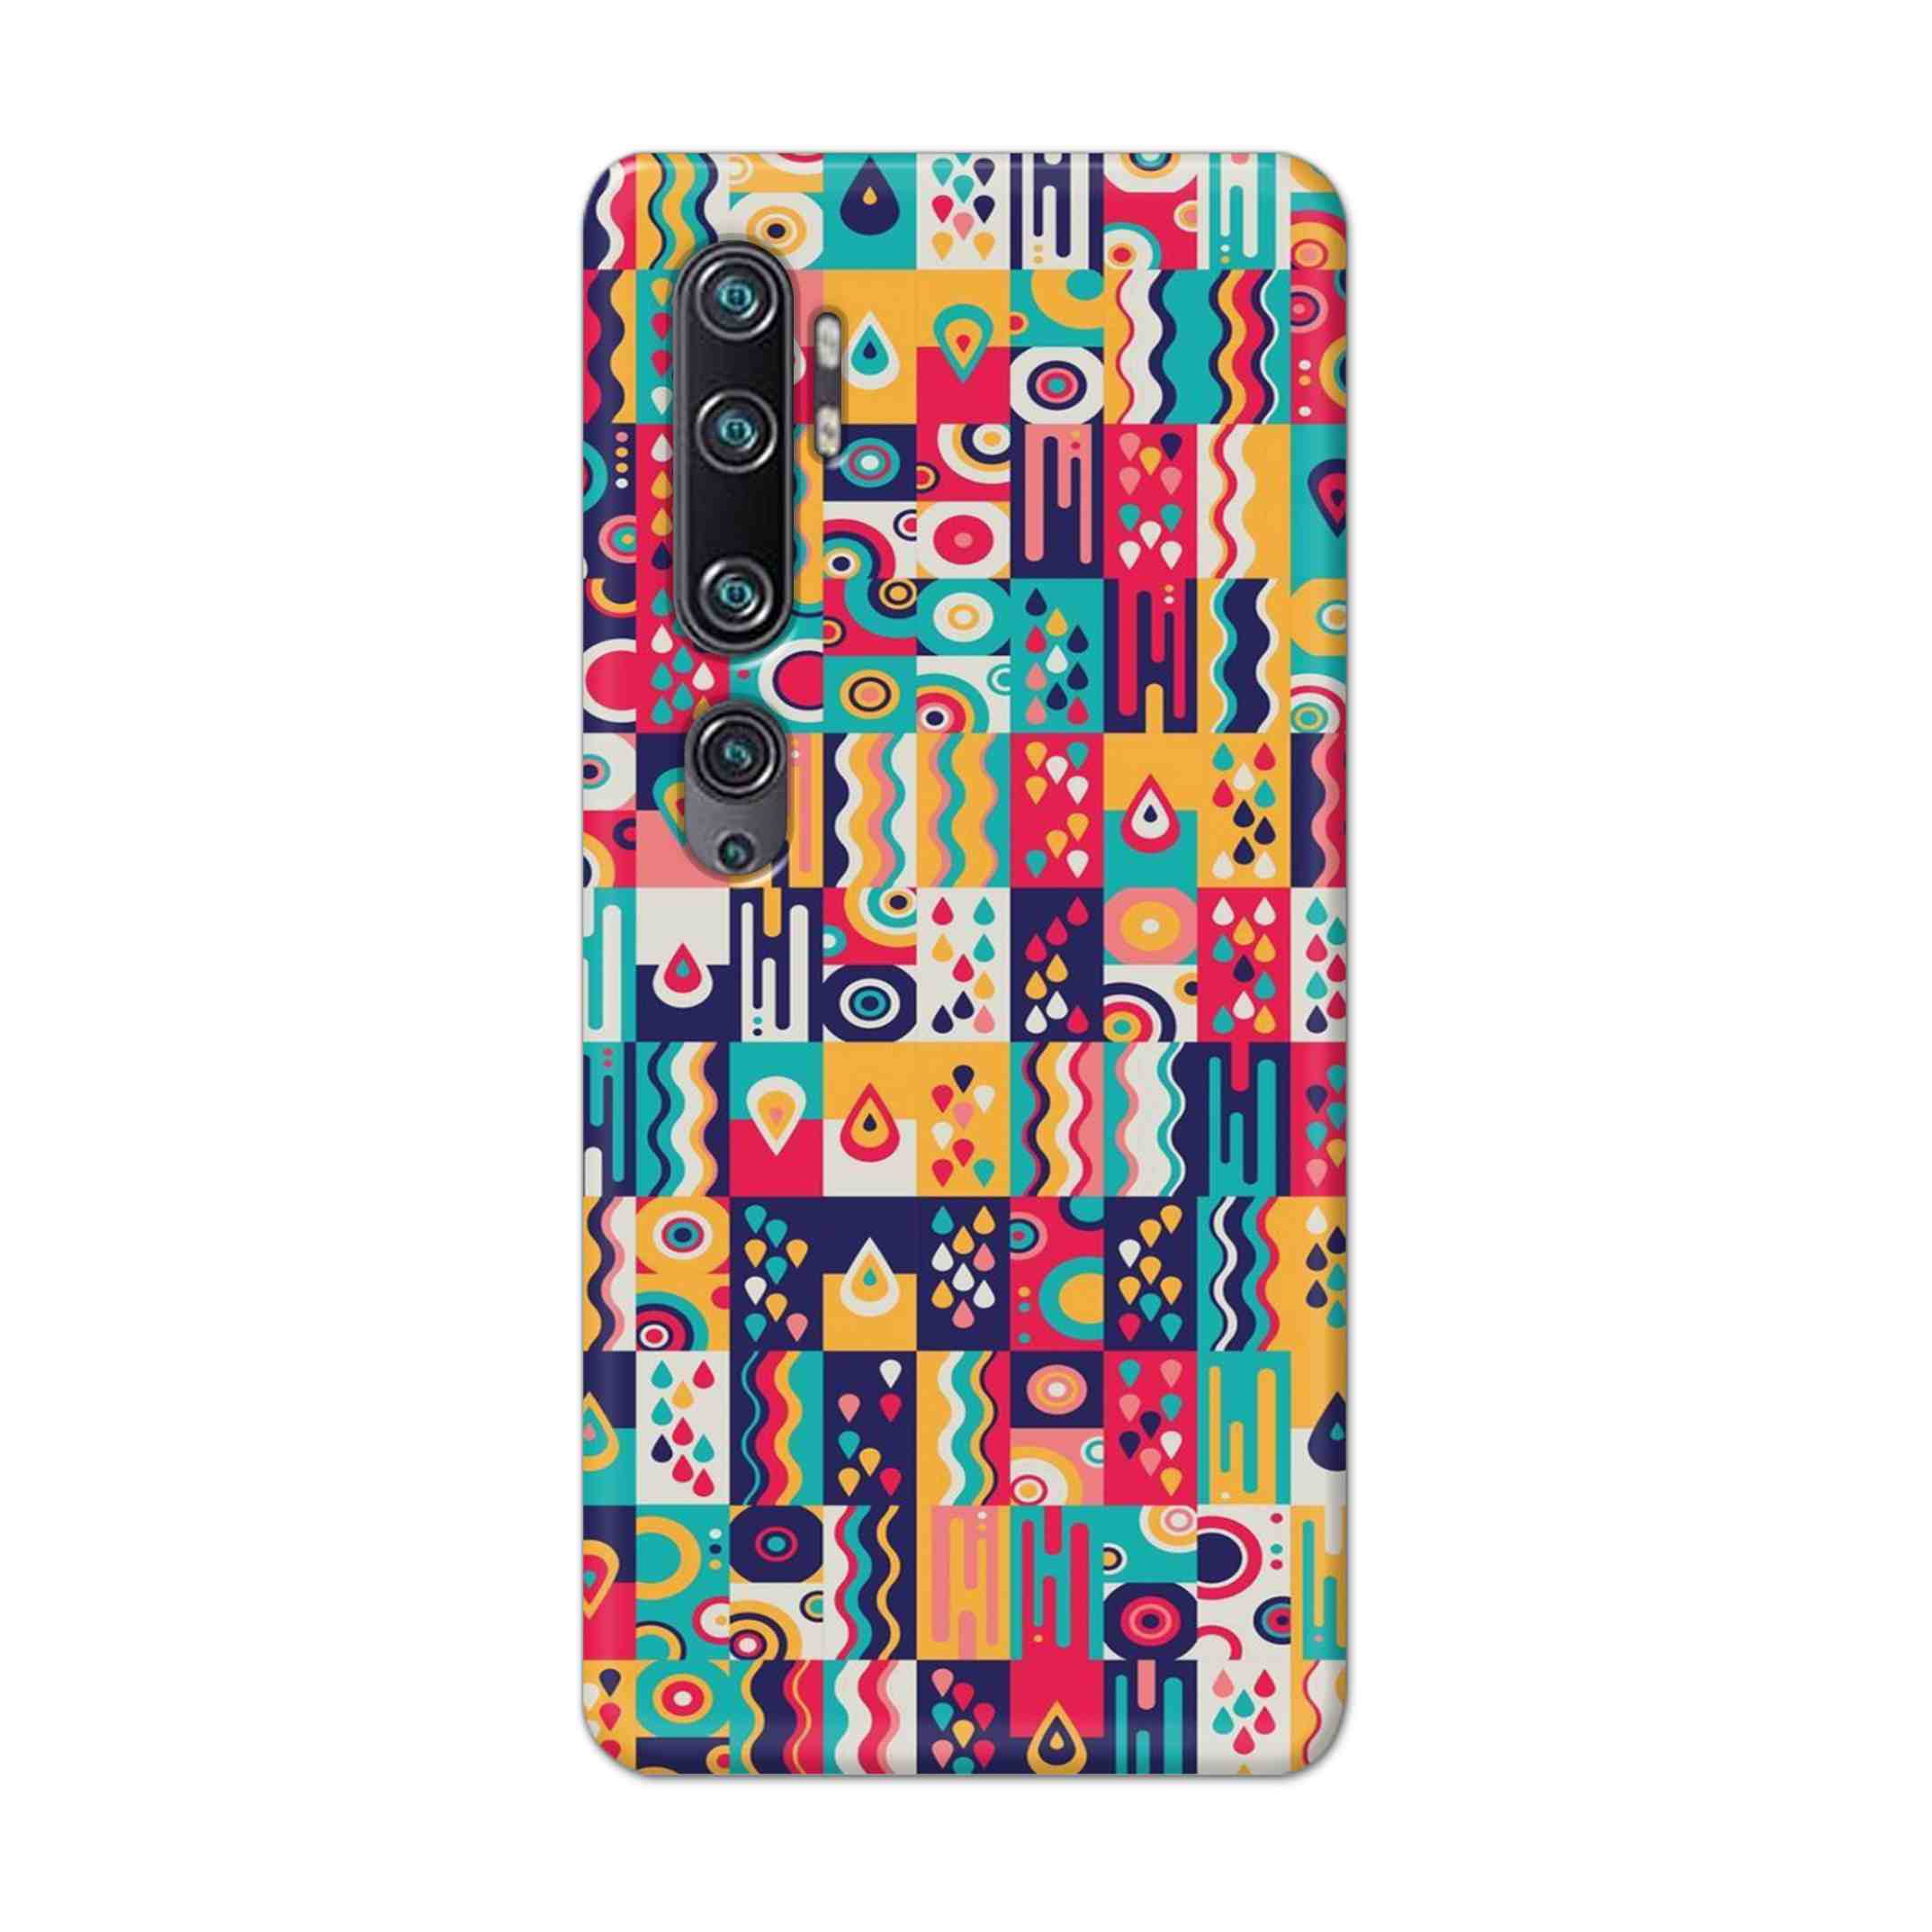 Buy Art Hard Back Mobile Phone Case Cover For Xiaomi Mi Note 10 Online